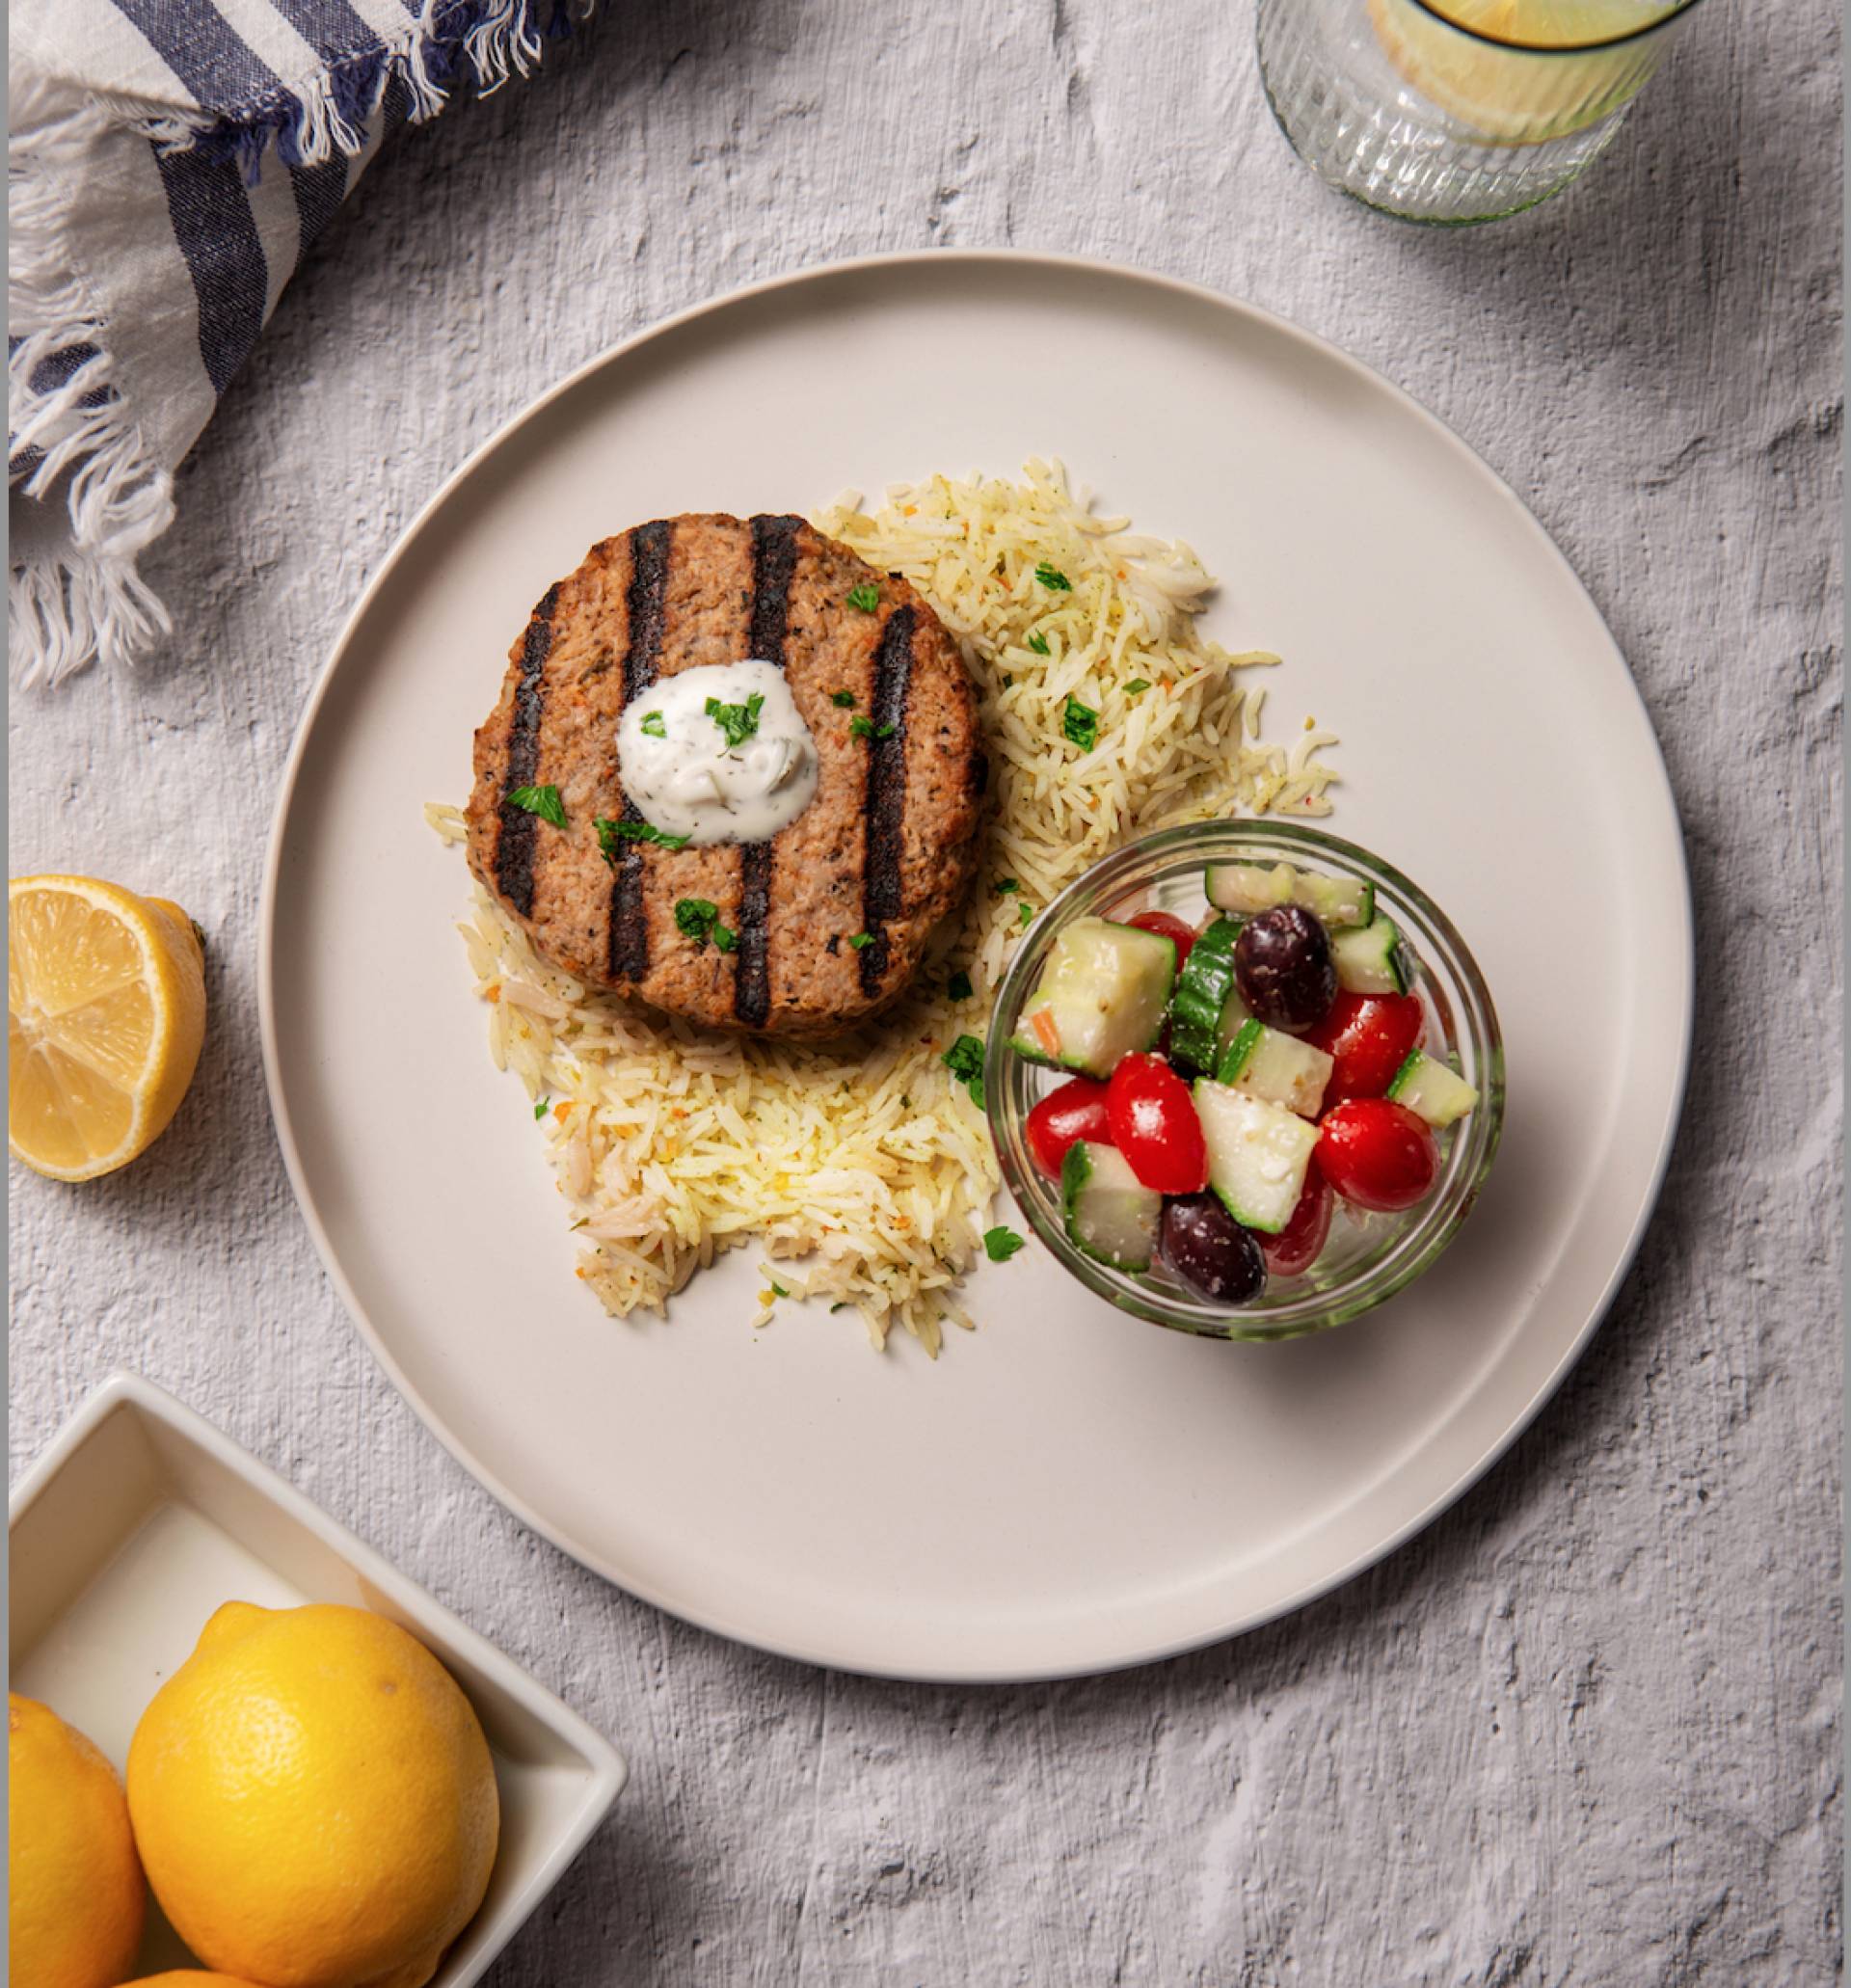 FITNESS: Greek Turkey Burger with Lemon Dill Sauce (LOW CARB)